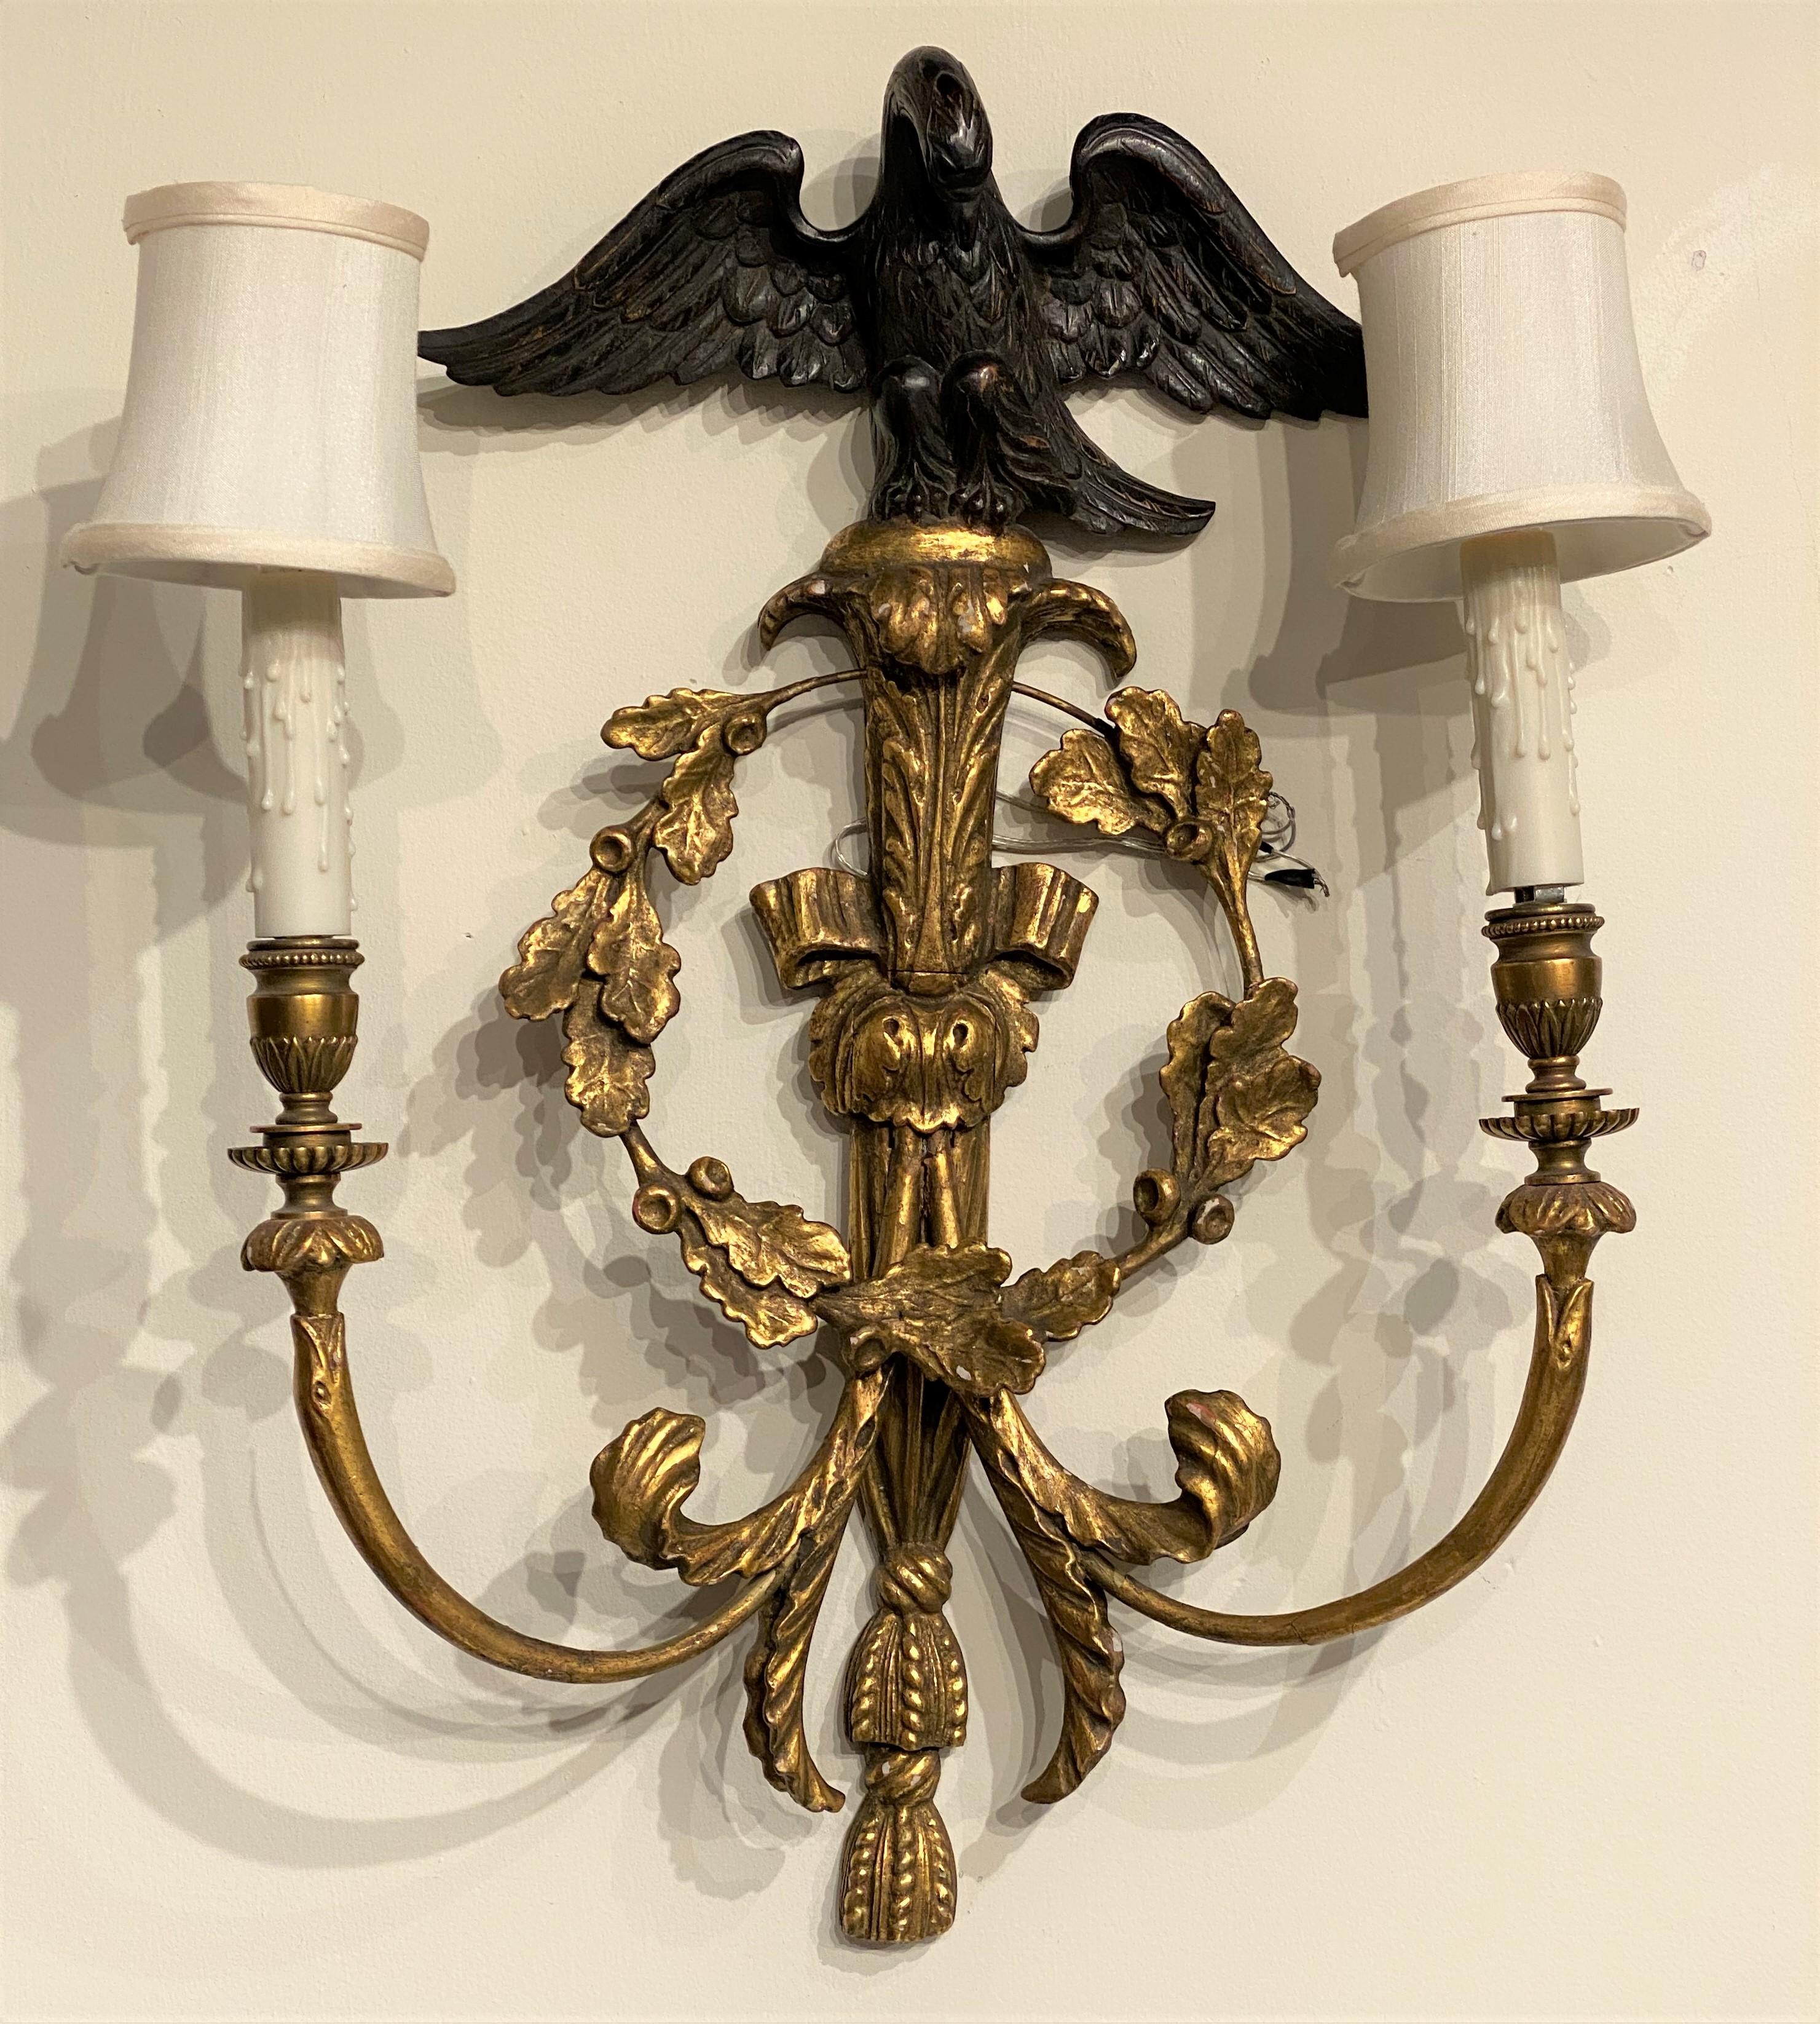 A fine pair of English Rococo style carved giltwood two-light sconces with metal arms, ebonized eagle tops and wreath motif. The pair dates to the 20th century and are in very good working order, recently rewired, with minor gilt gesso losses, and